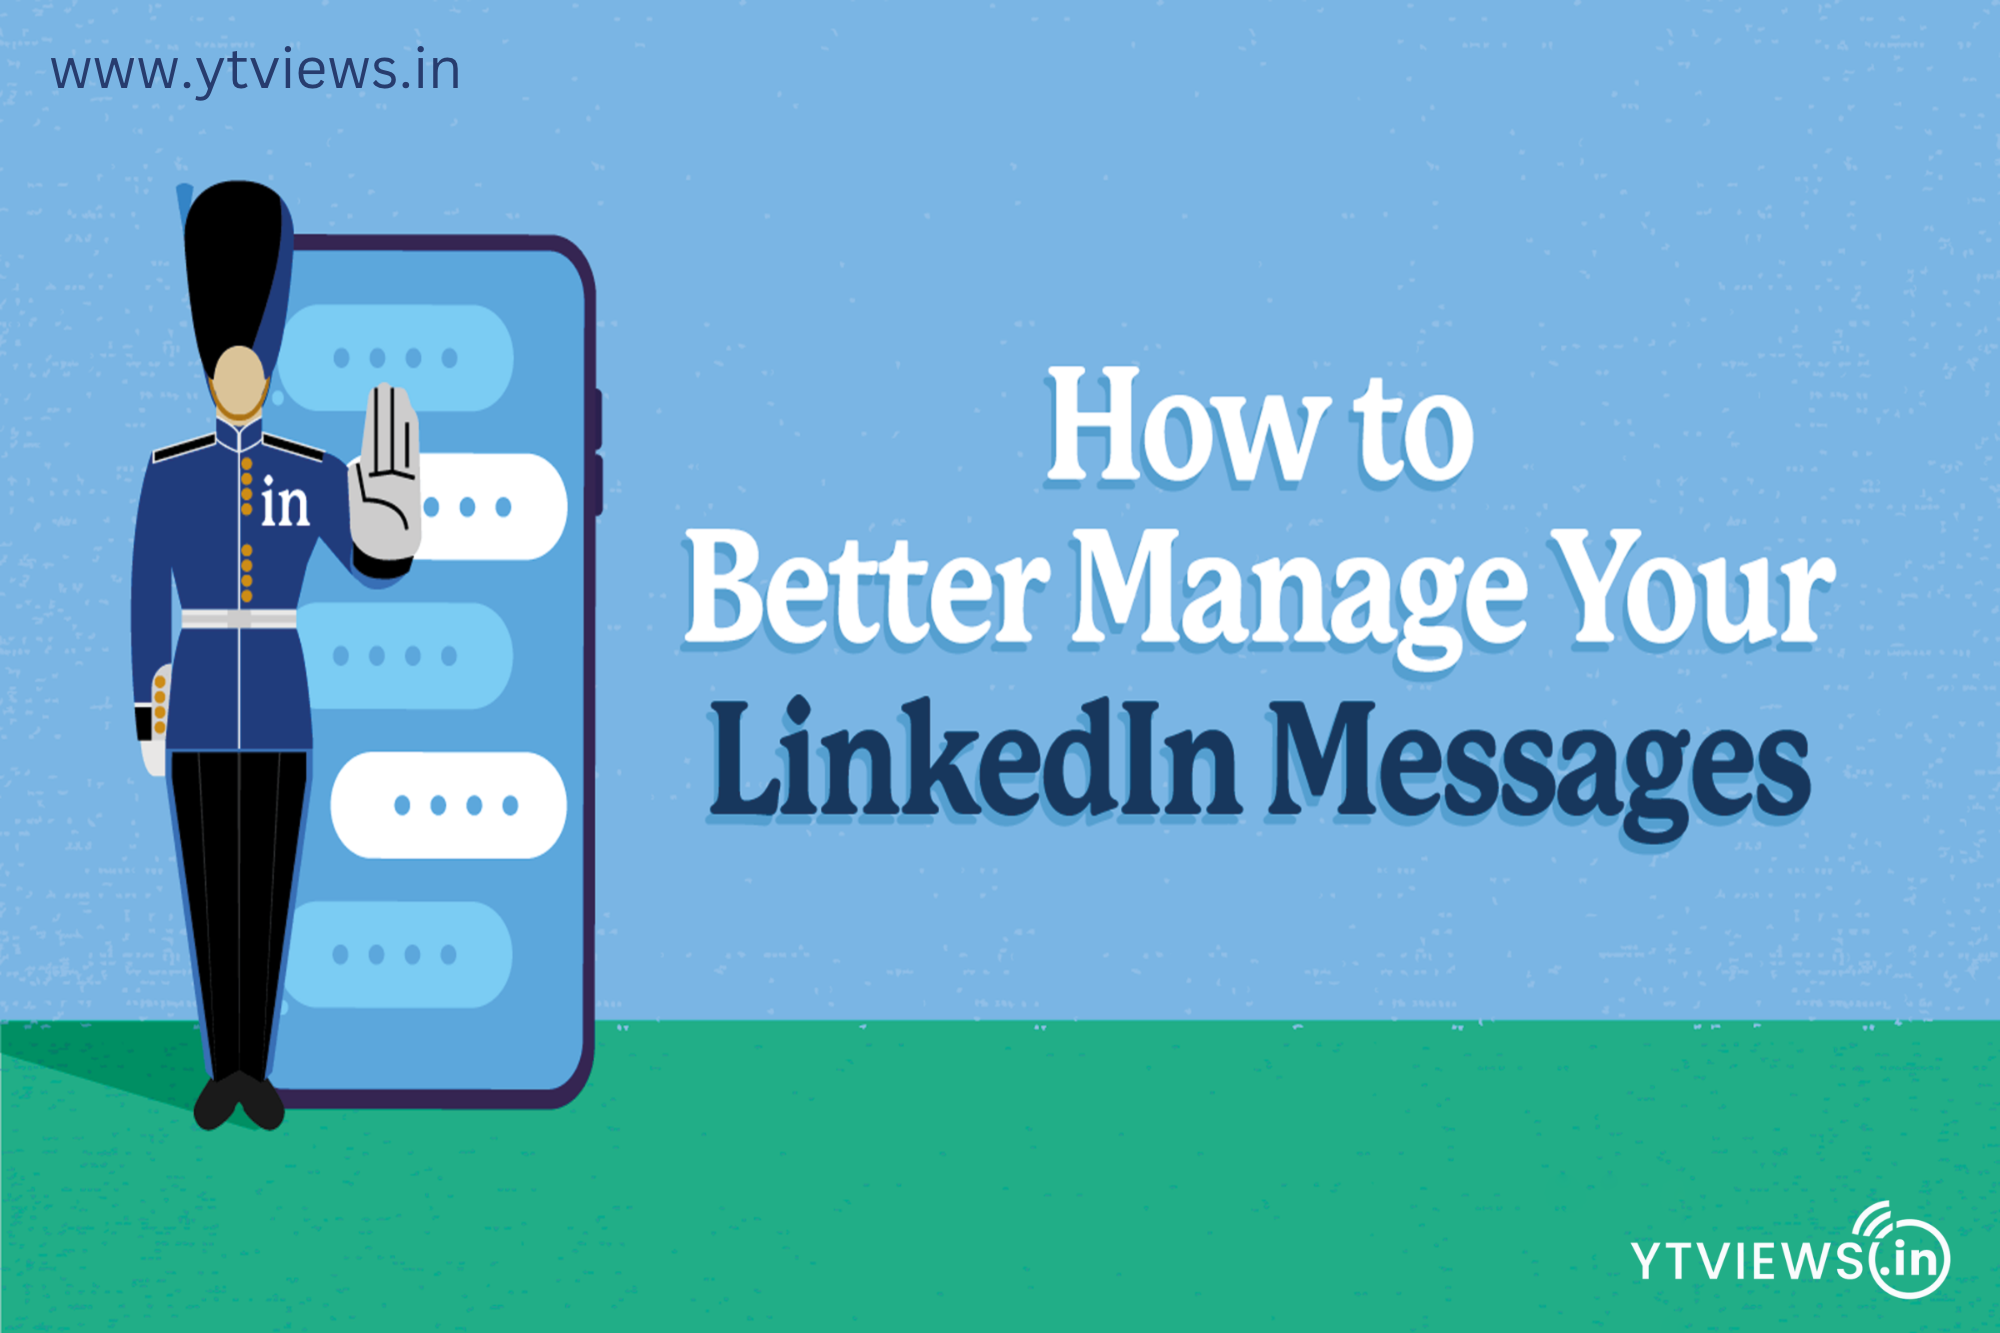 How to better manage your LinkedIn messages